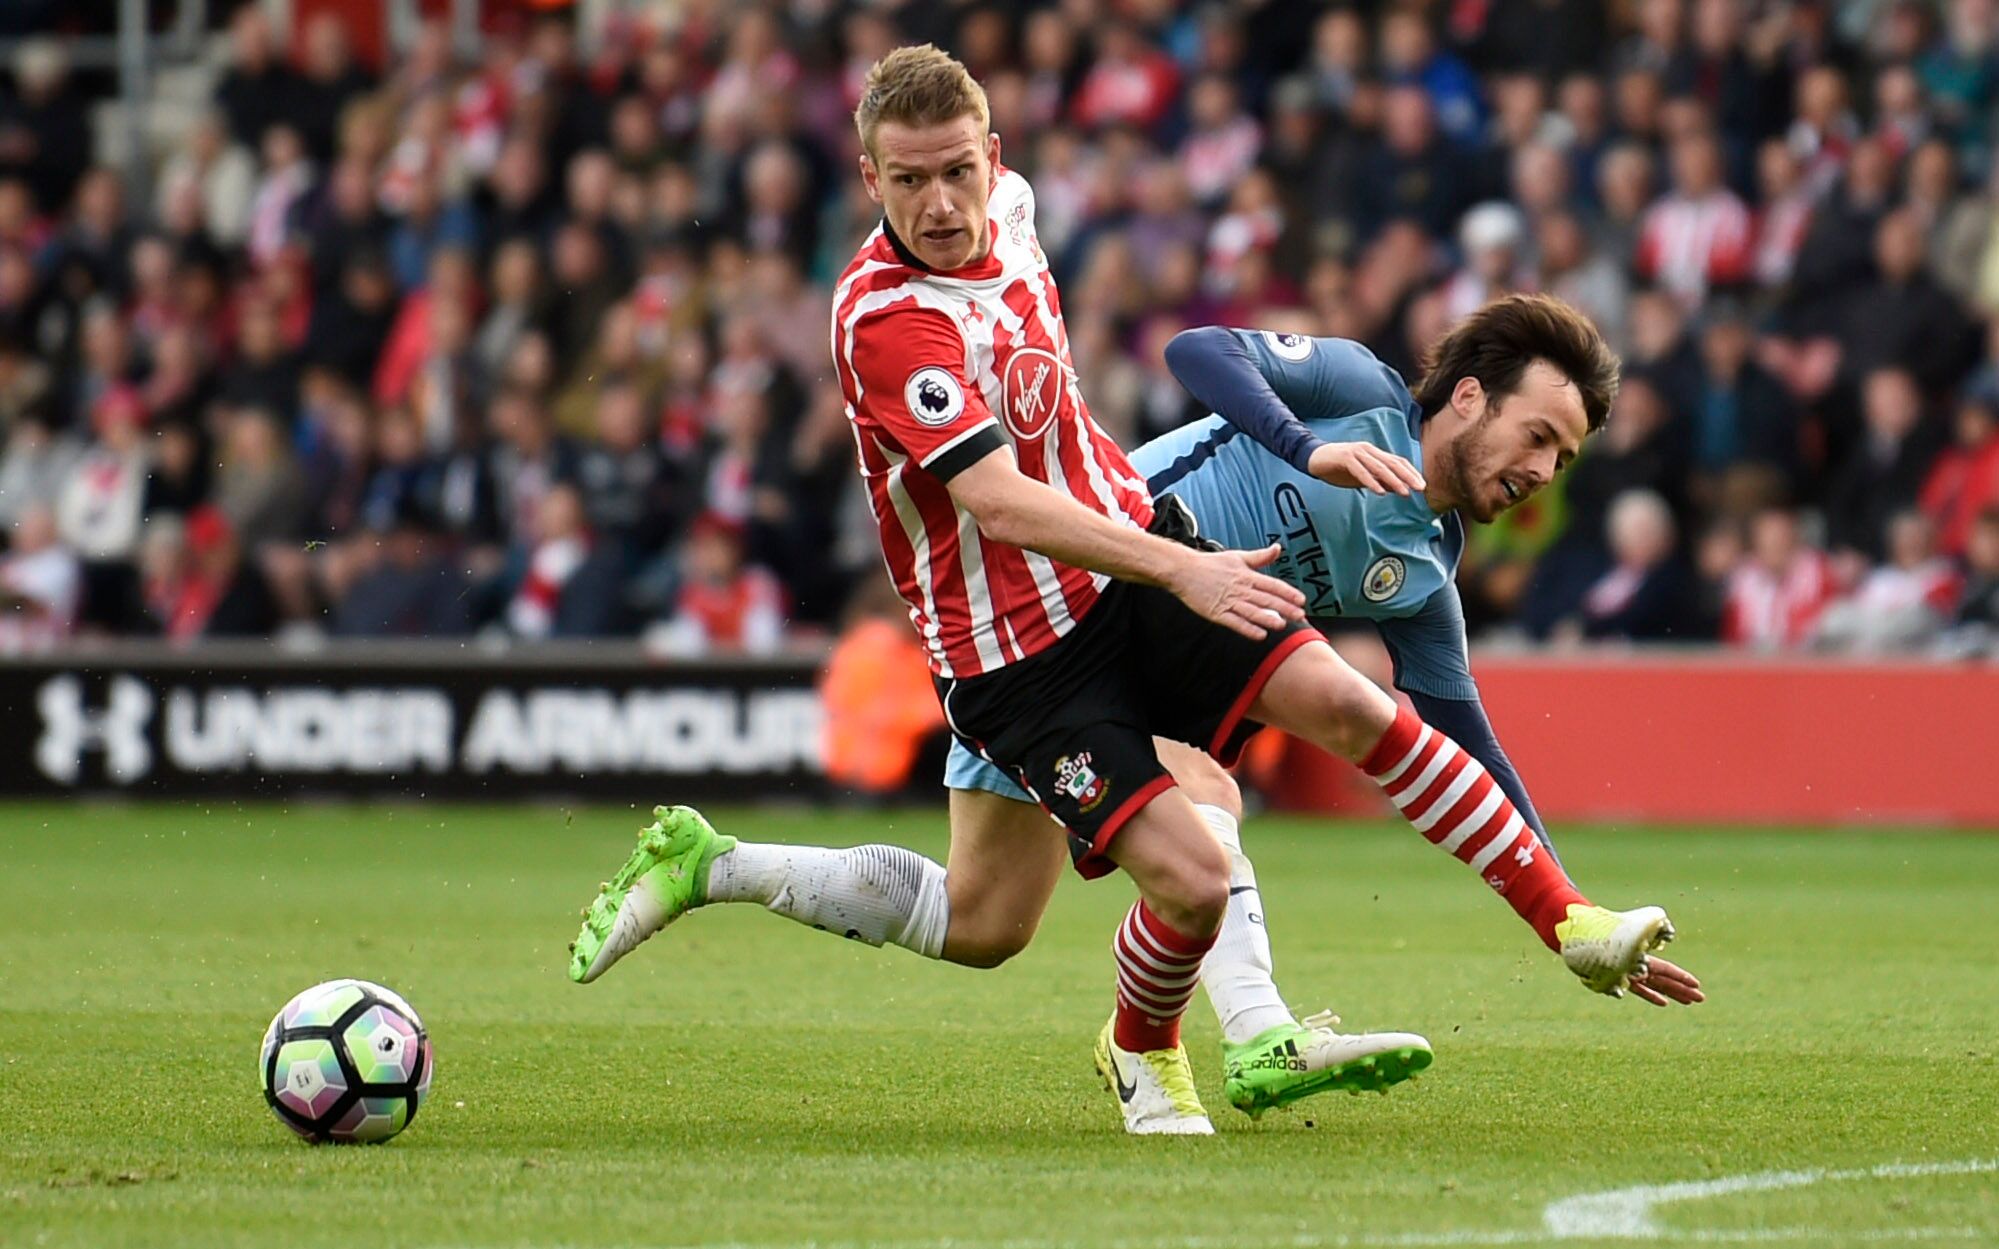 Britain Soccer Football - Southampton v Manchester City - Premier League - St Mary's Stadium - 15/4/17 Southampton's Steven Davis in action with Manchester City's David Silva  Action Images via Reuters / Tony O'Brien Livepic EDITORIAL USE ONLY. No use with unauthorized audio, video, data, fixture lists, club/league logos or "live" services. Online in-match use limited to 45 images, no video emulation. No use in betting, games or single club/league/player publications.  Please contact your accoun